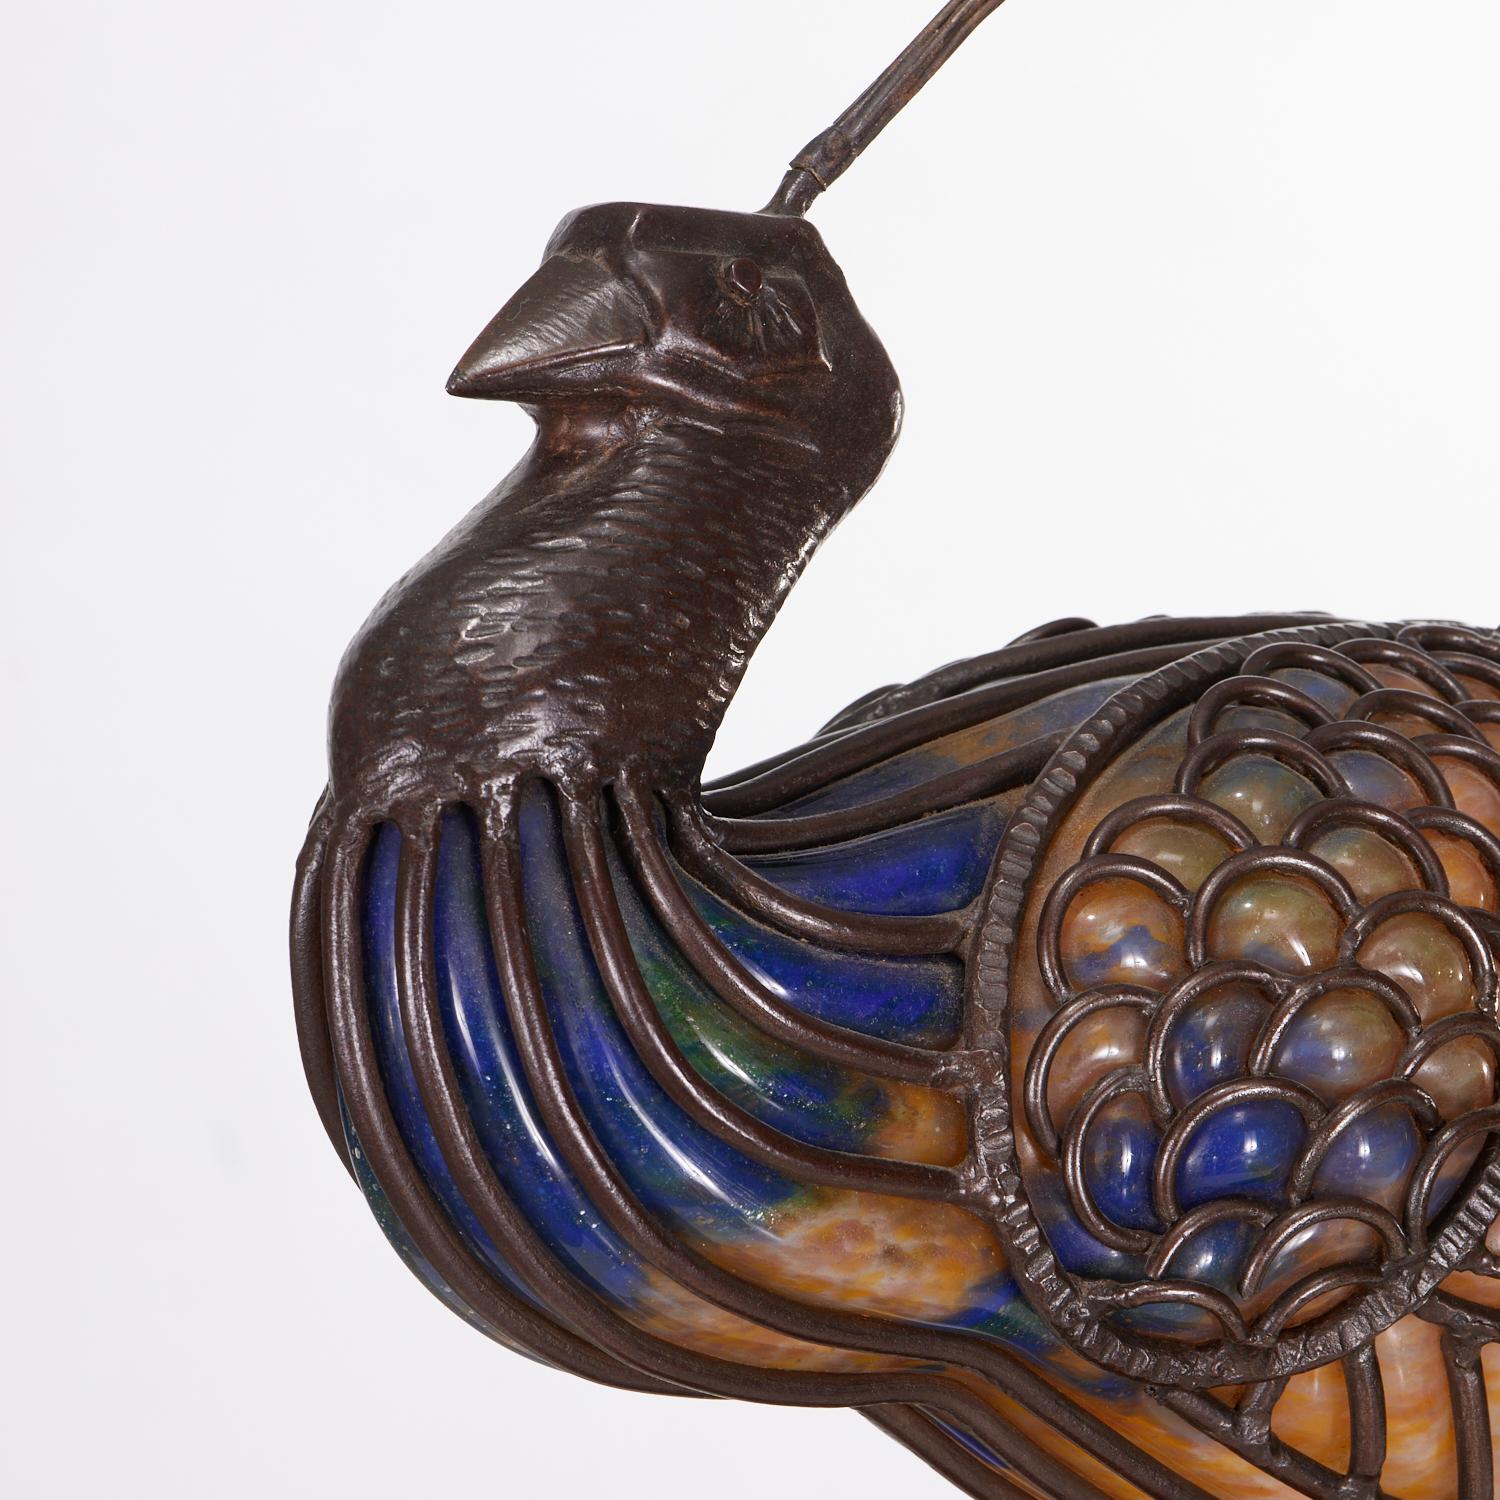 Rare art glass and wrought iron sculptural lamp by Muller-Frères, representing a peacock bird. This sculptural lamp is finely crafted with a brown patinated wrought, hammered iron sculpted bird inset with blown 